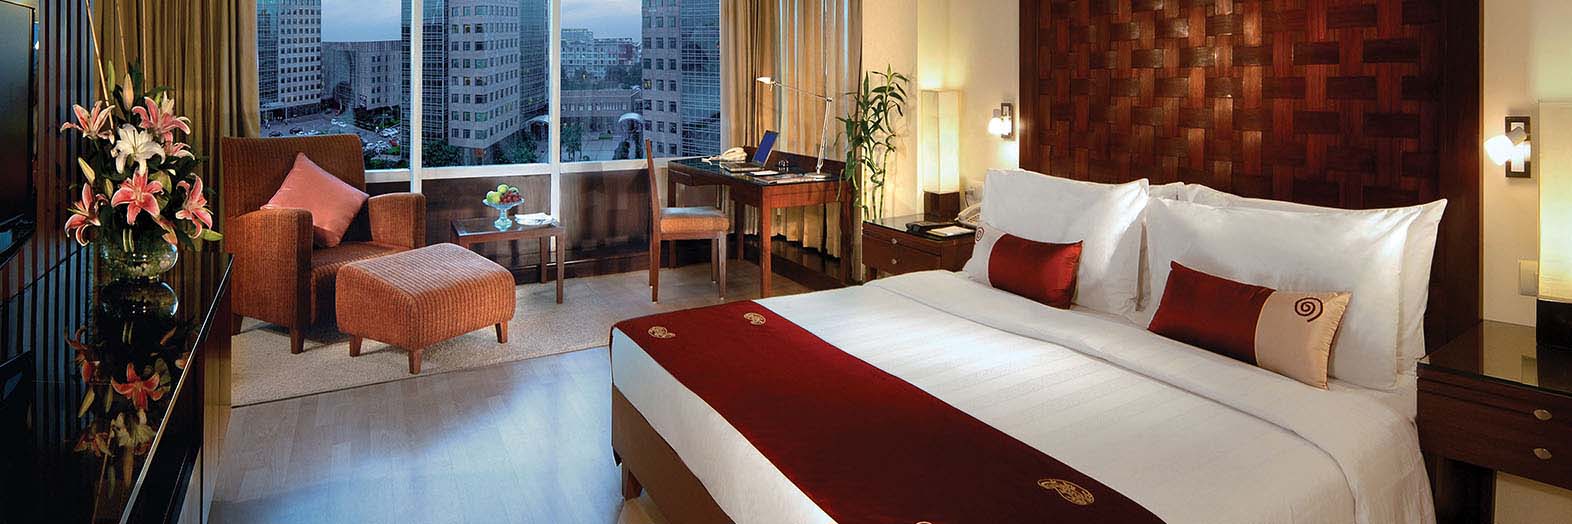 Fortune Select Global – Hotels in Gurgaon Room